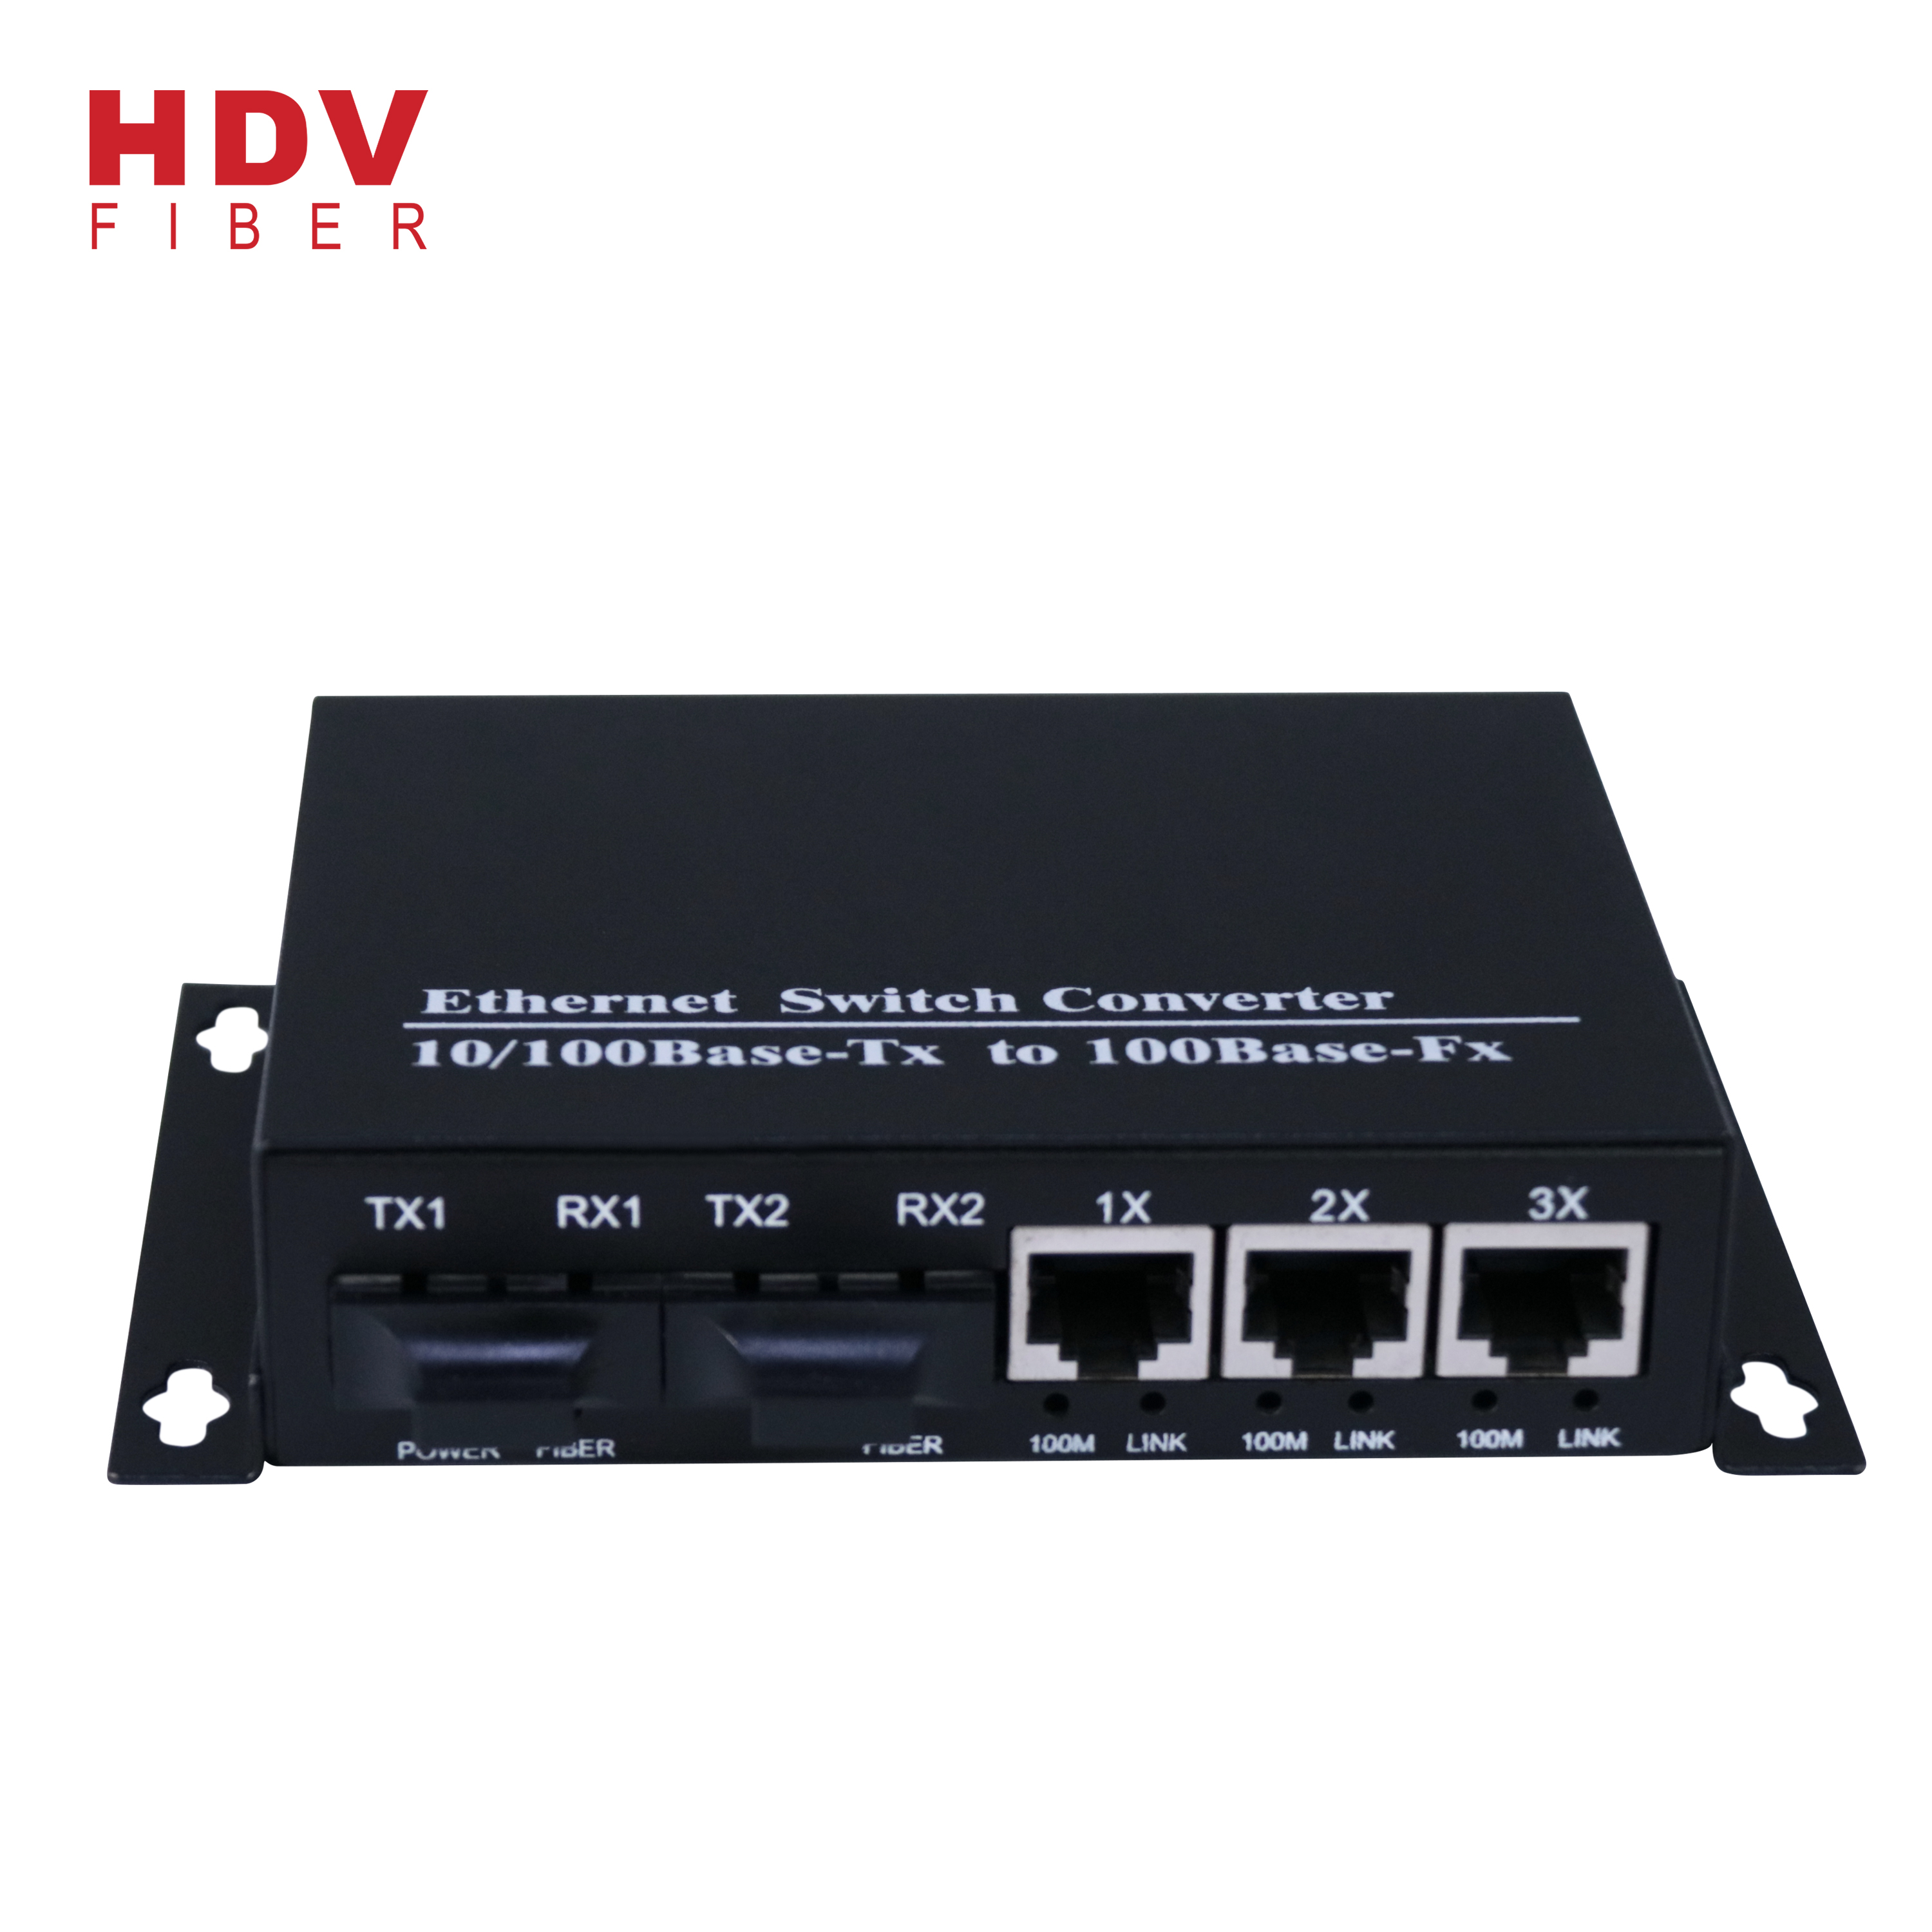 Hot New Products Managed Switches - New Model Dual Fiber Compatible Huawei Industrial 3 Port Ethernet Switch – HDV